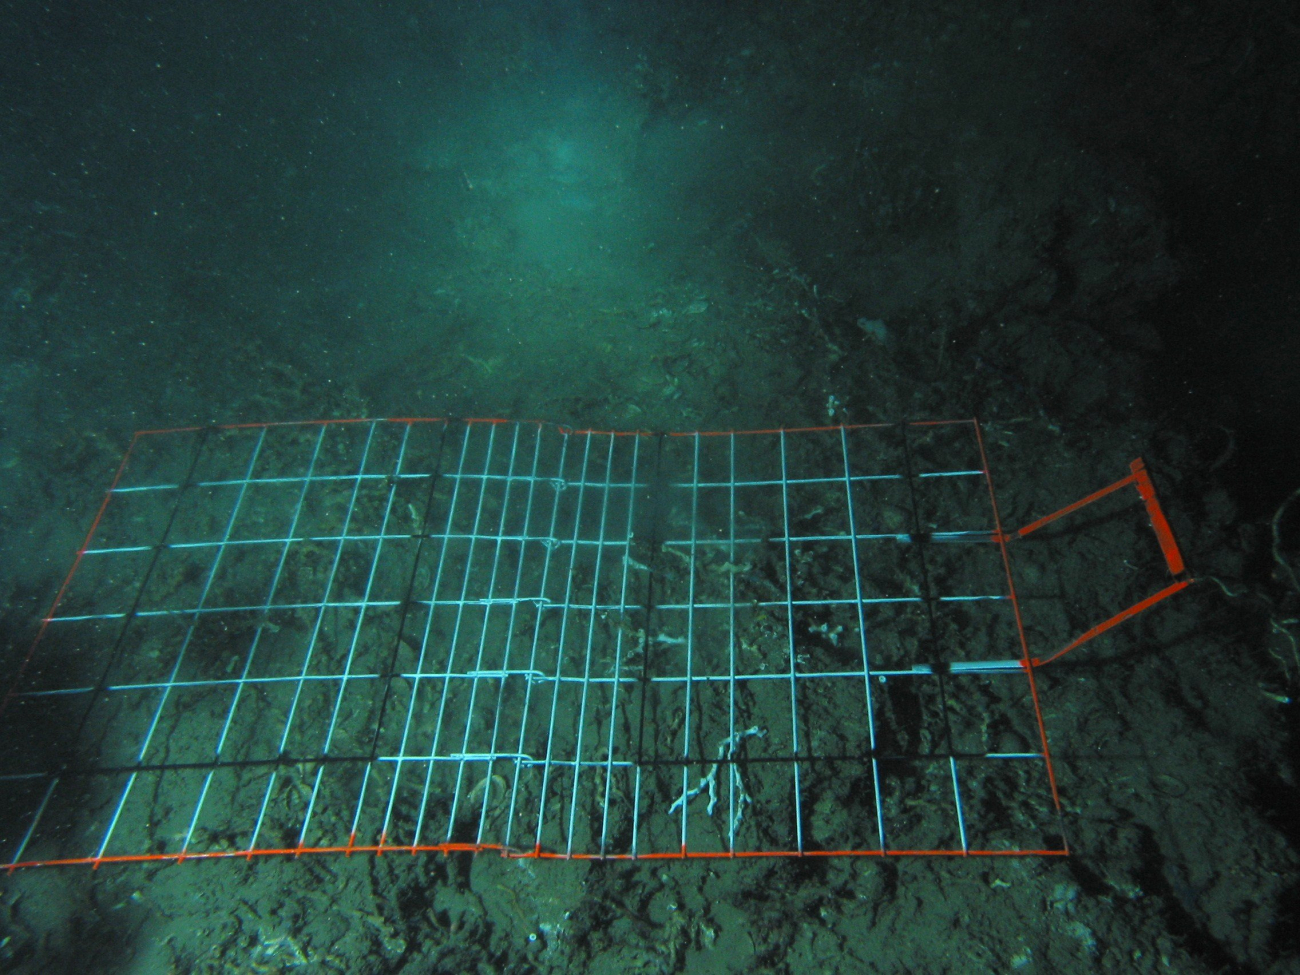 A grid placed on the seafloor to study diversity and distribution of species